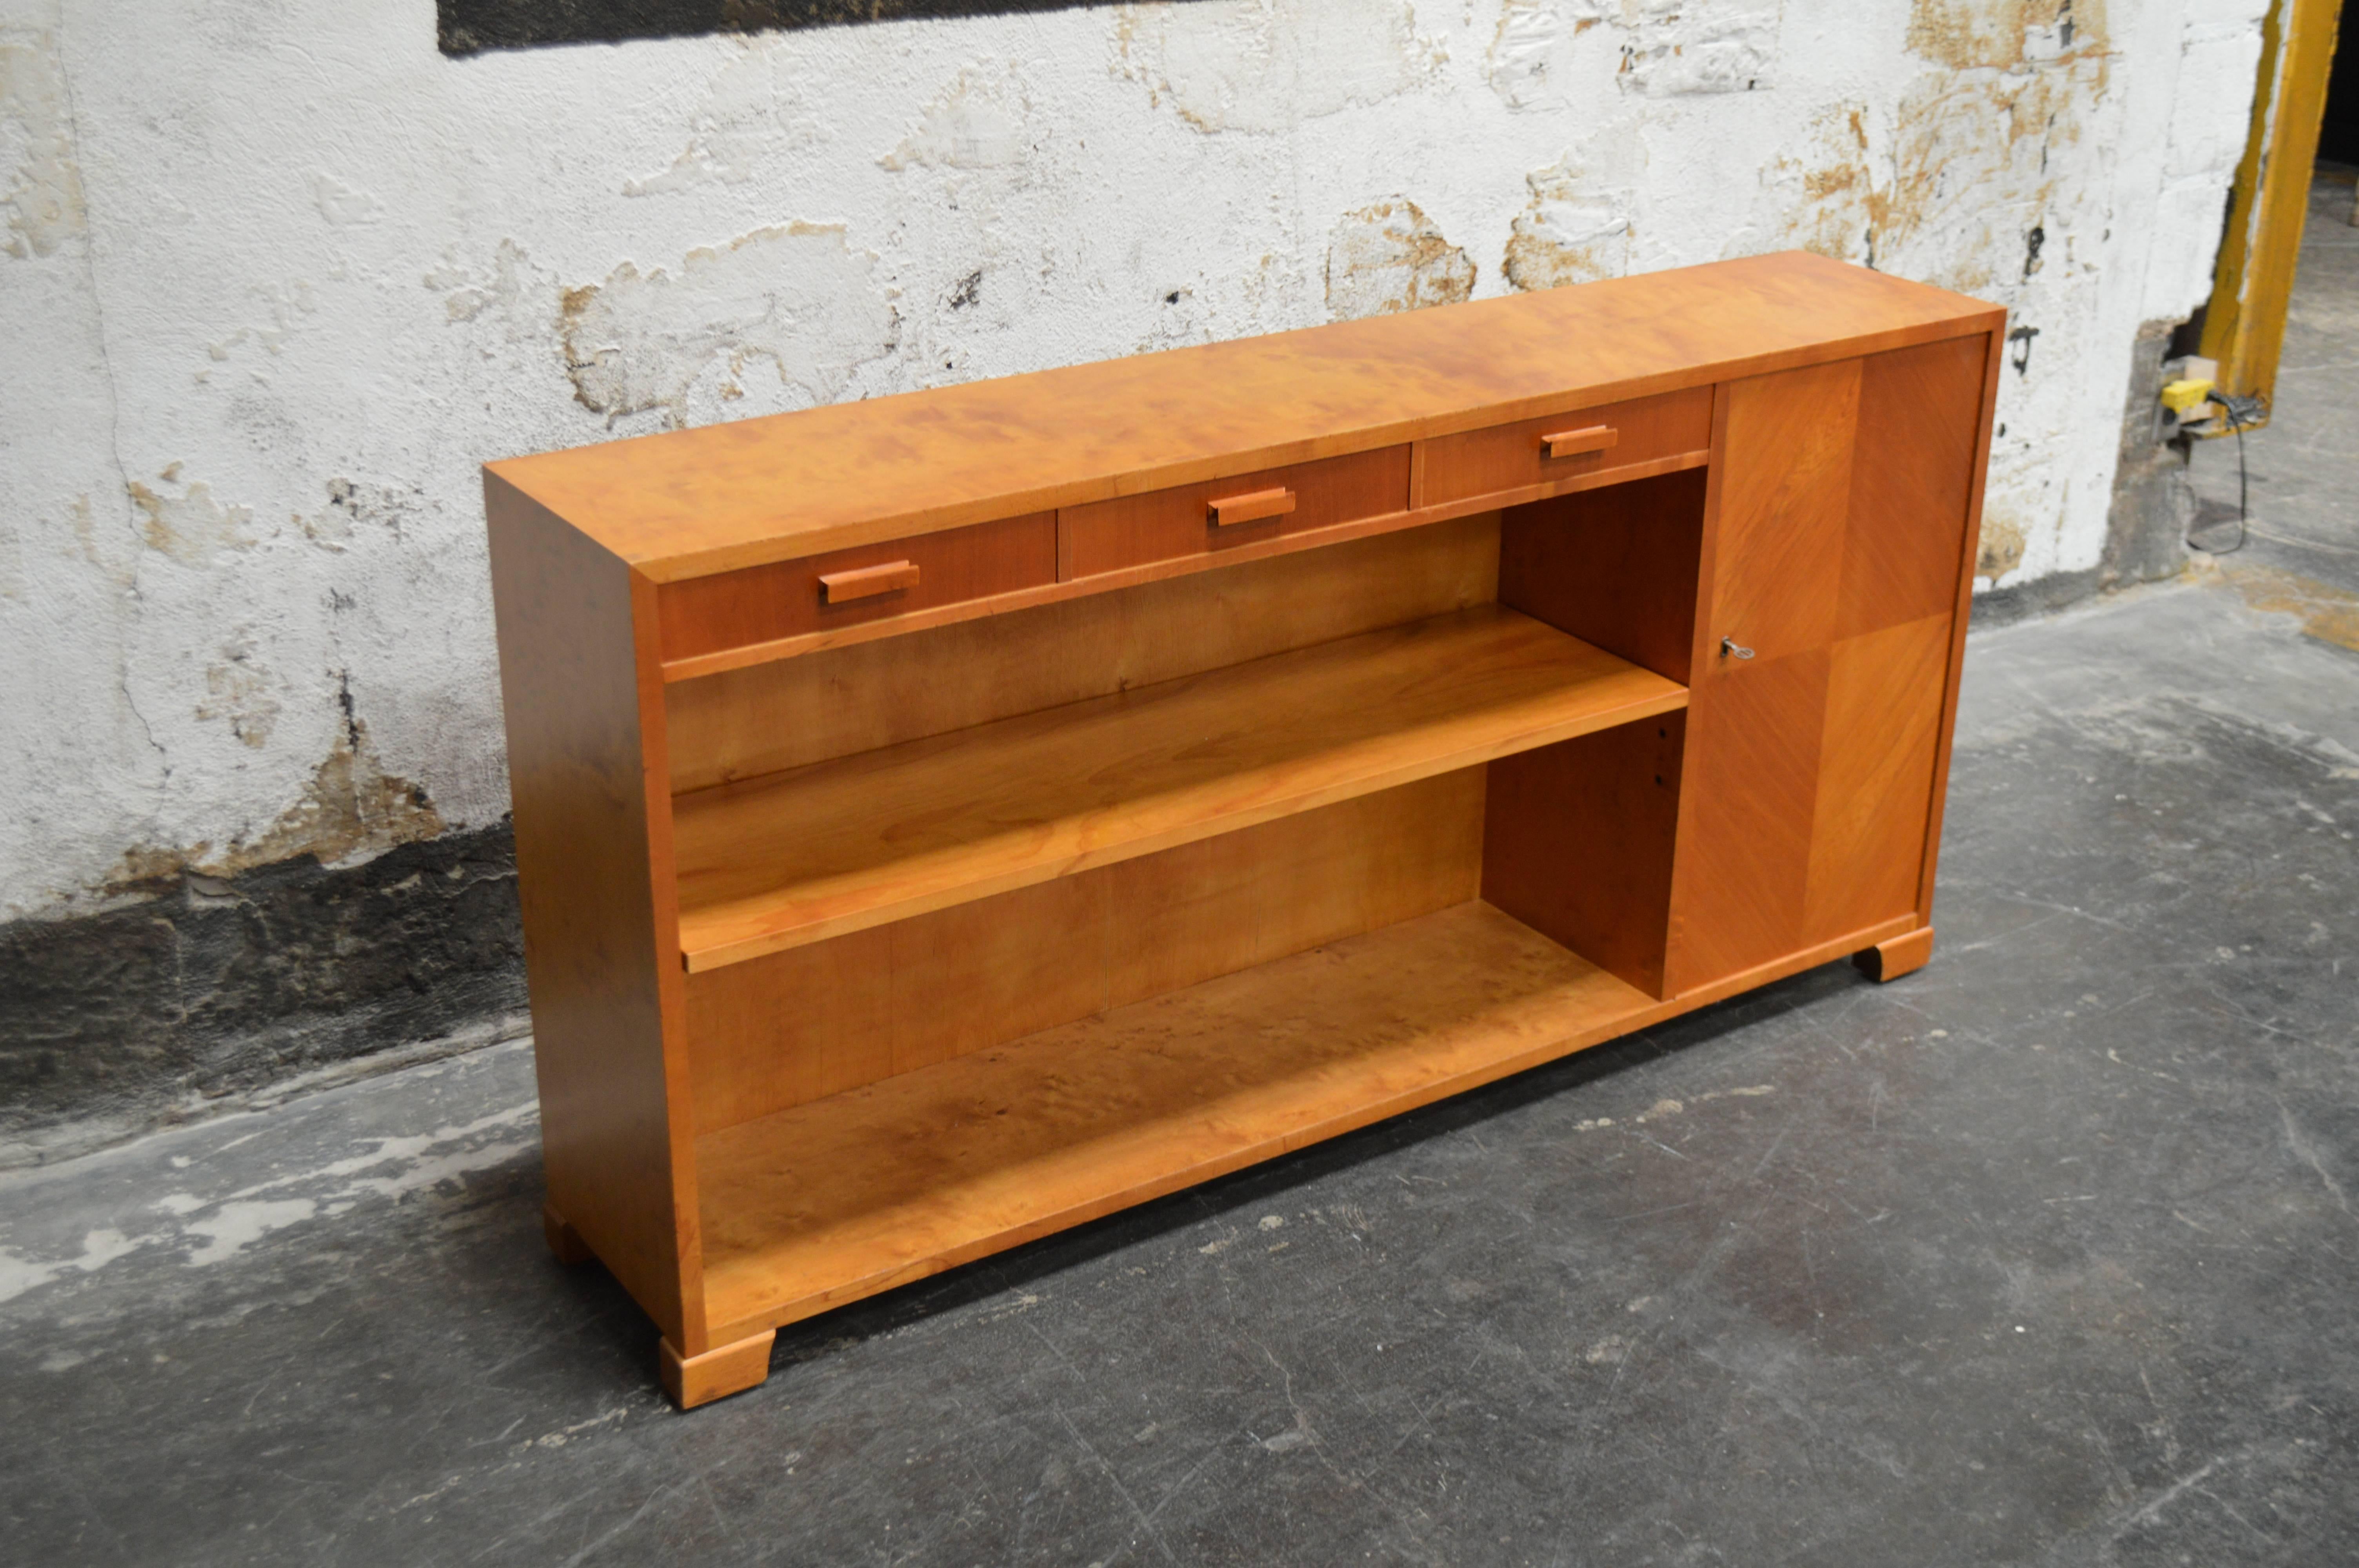 Art Deco or Art Moderne bookcase was cabinet crafted of native golden elm with bookmatched door. This gorgeous wood has mellowed to a rich amber color. Adjustable shelves. Key included. Perfect as a slim console or stand for a flat screen TV.